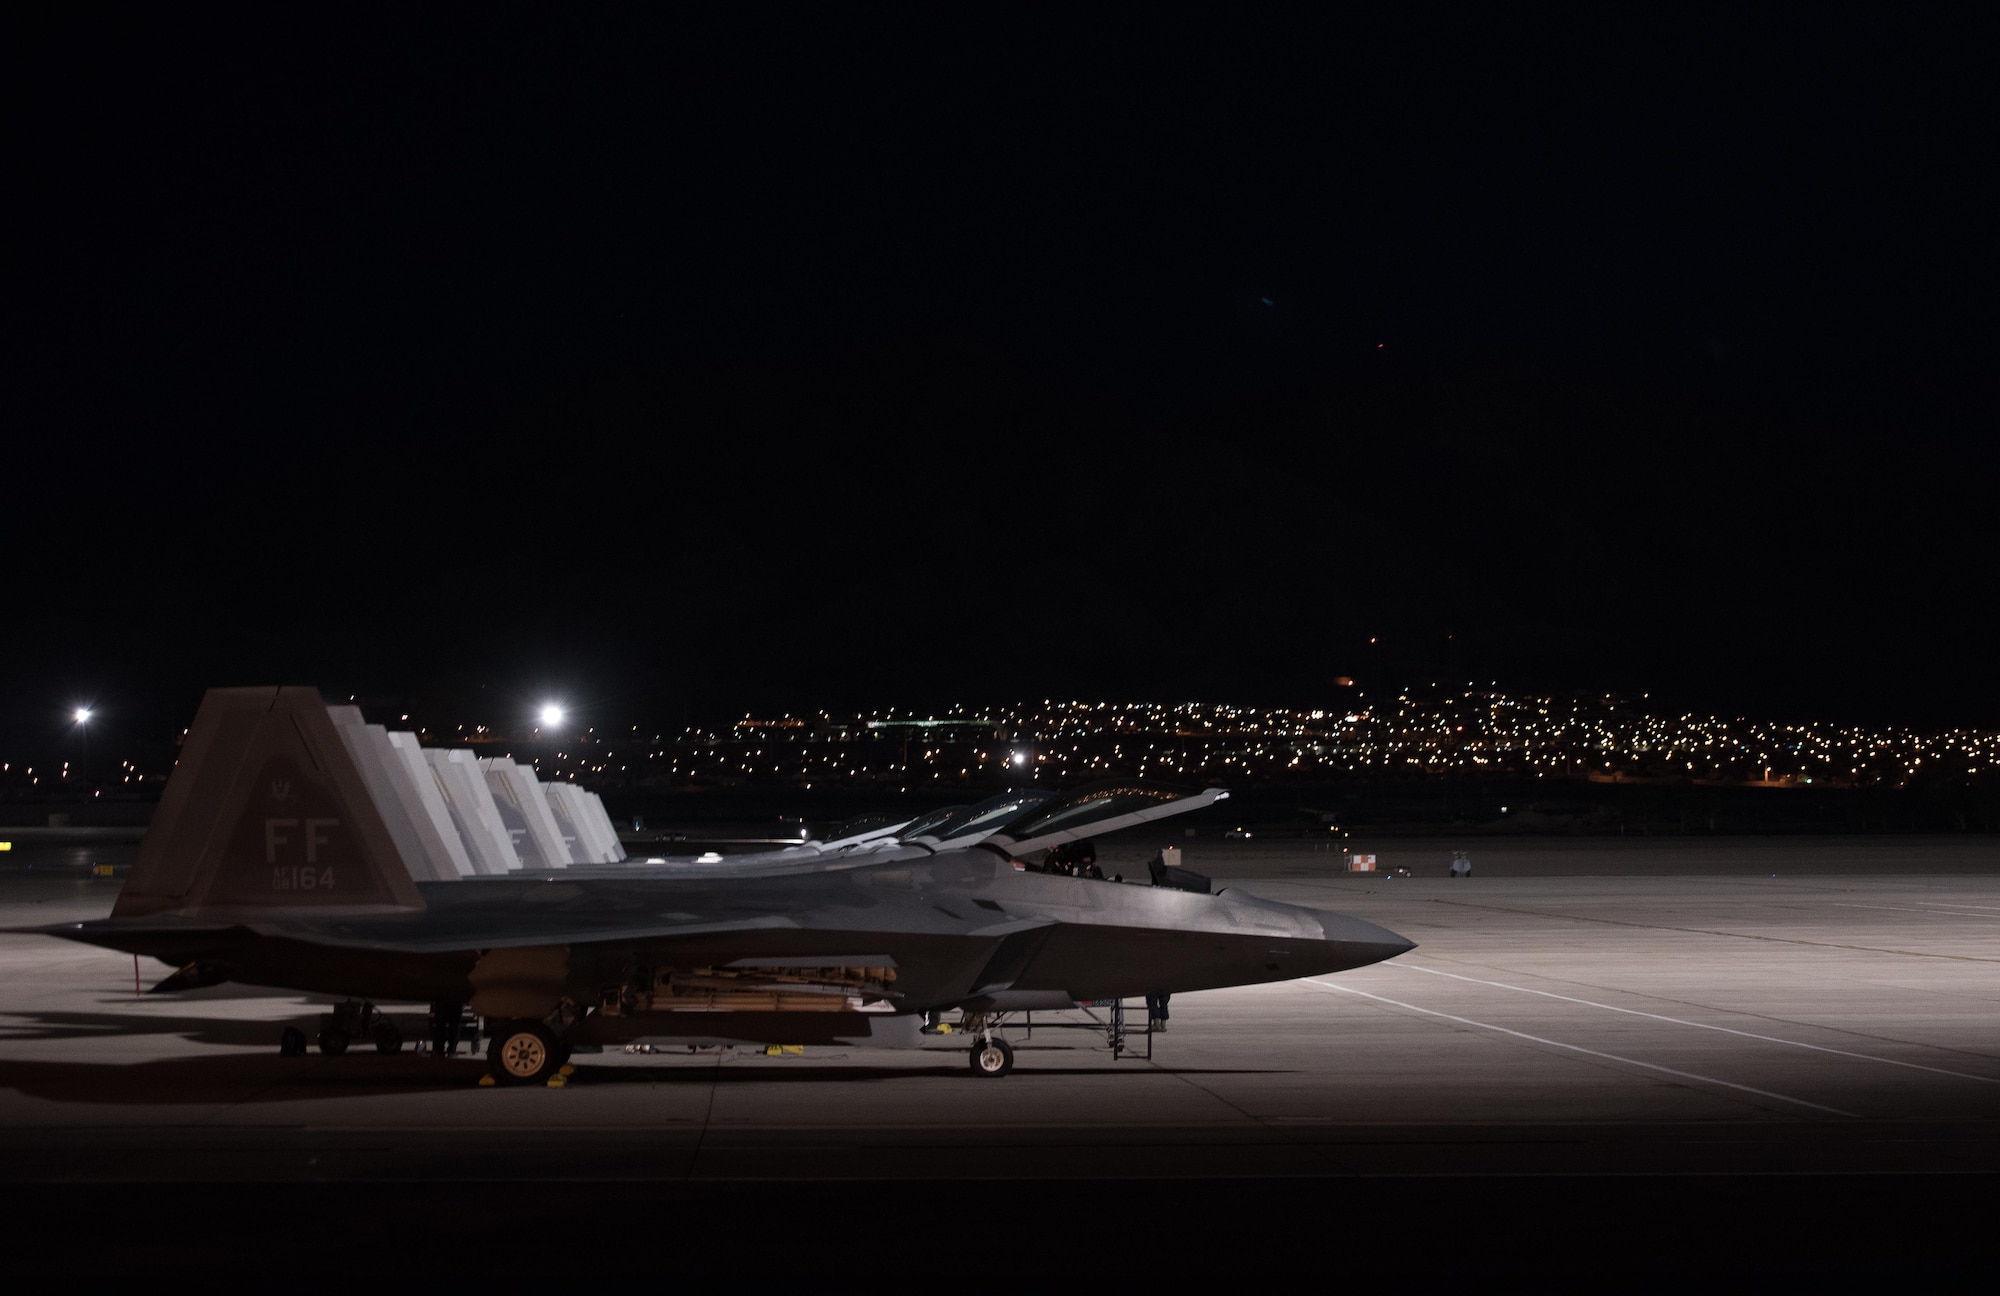 U.S. Air Force F-22 Raptors are at the ready for the night mission at Red Flag 17-4 at Nellis Air Force Base, Nev., Aug. 21, 2017.  During the mission Capt. Flash, 94th Fighter Squadron pilot, will complete his mission commander upgrade certification. (U.S. Air Force photo by Staff Sgt. Carlin Leslie)